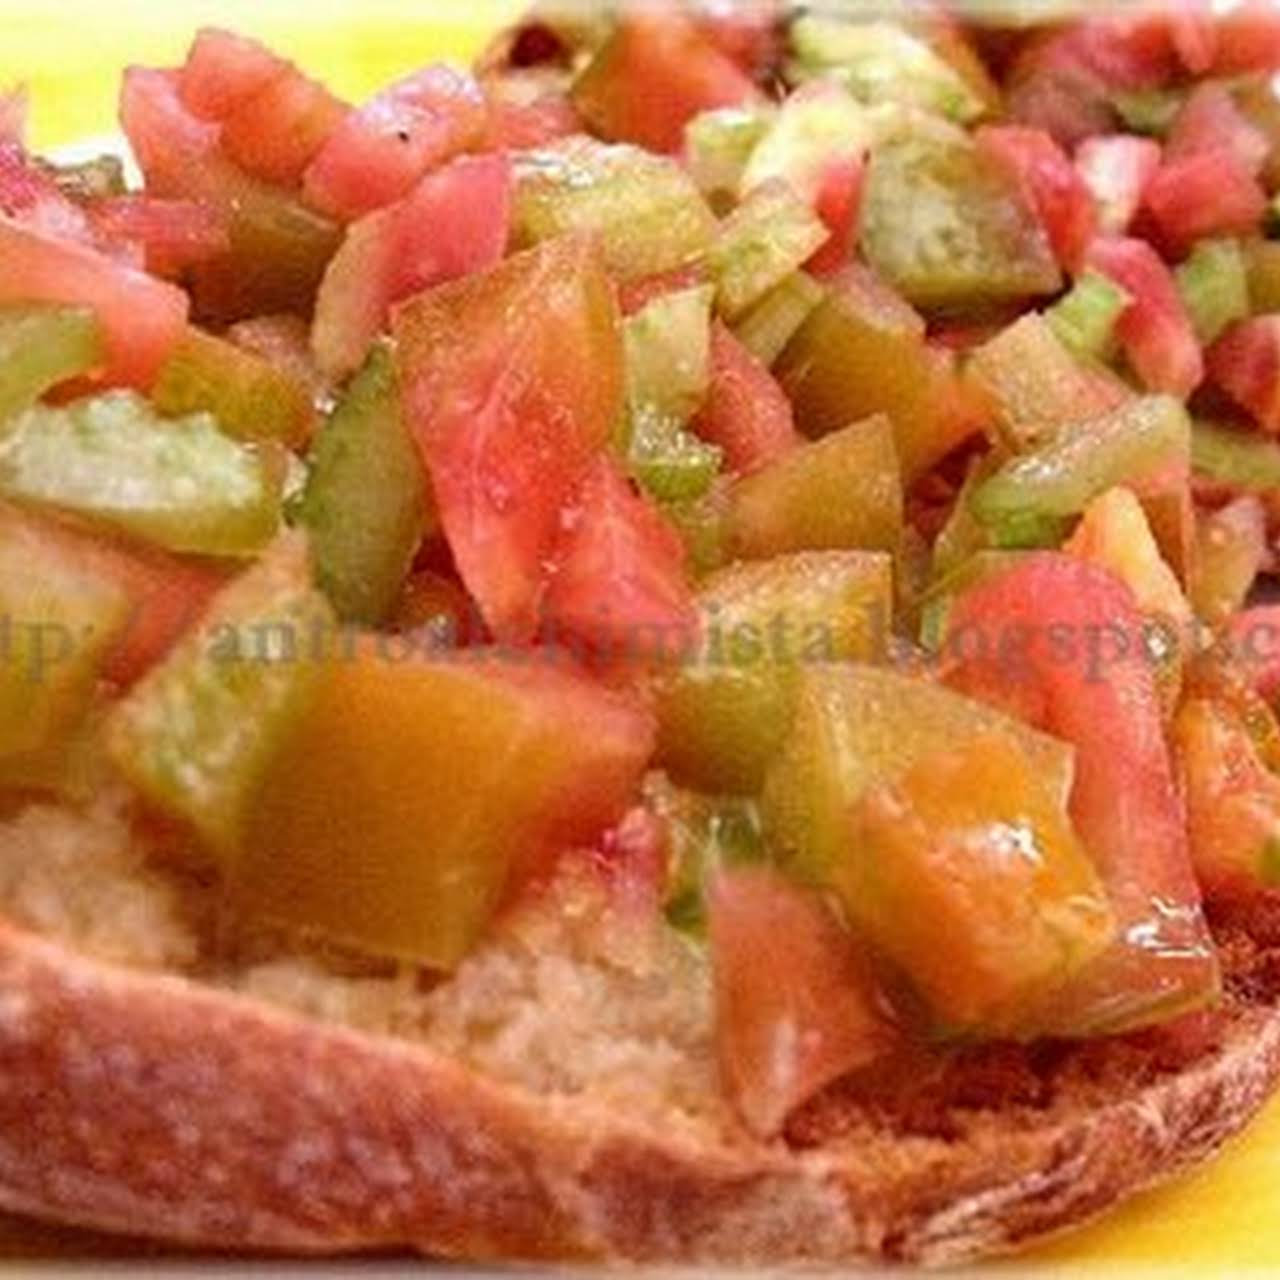 Tomatoes and Celery  re Toasted Bread